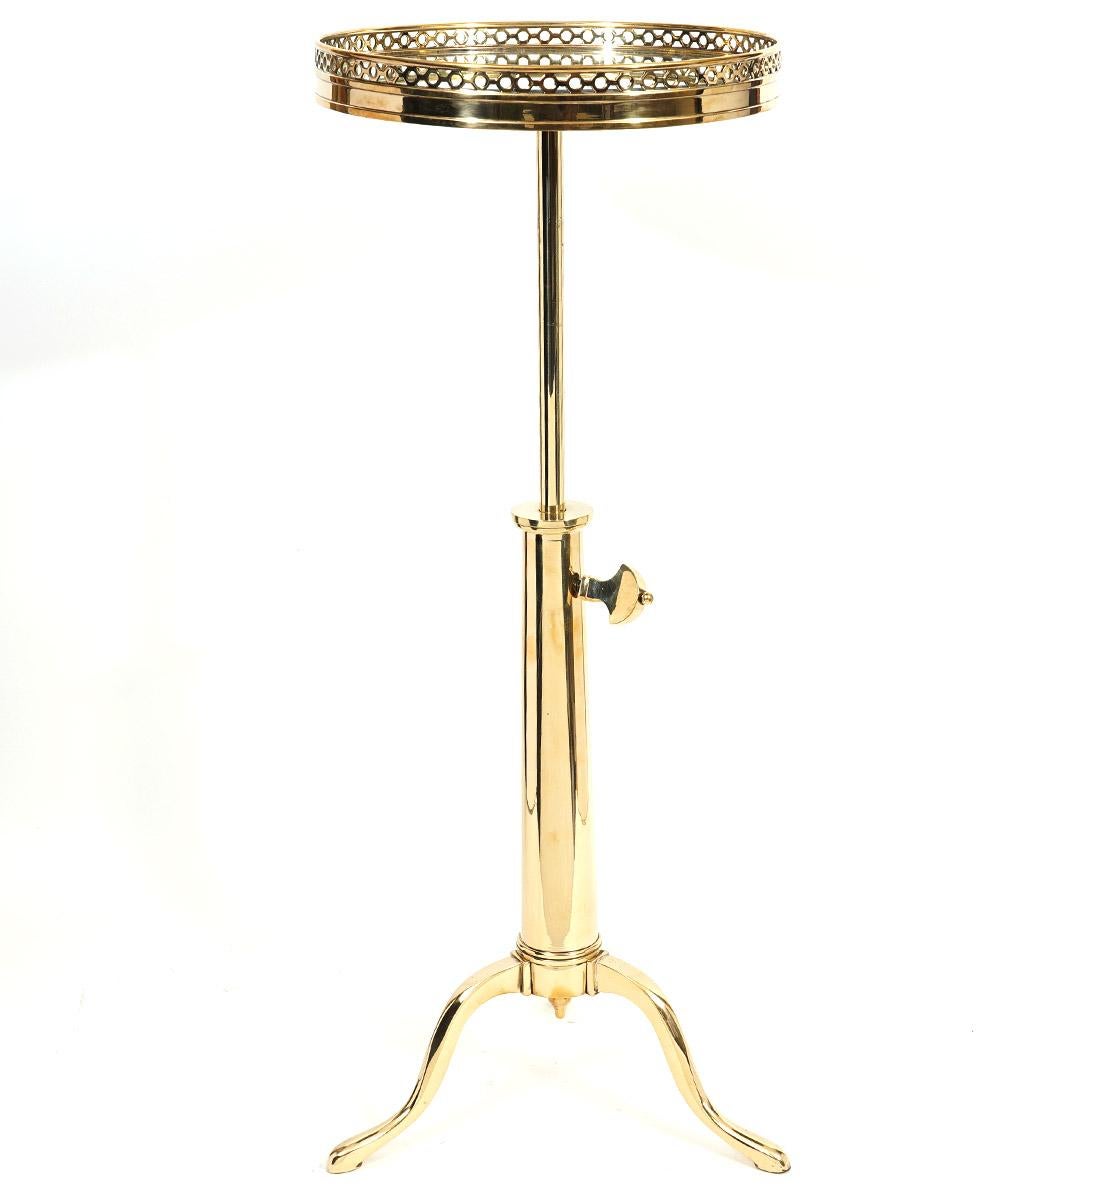 This French Maison Toulouse telescoping brass occasional tables, dating to around 1970 and retailed by John Boone NY, feature circular pierced gallery tops with inset mirror supported by an adjustable telescoping shaft and cabriole legs with pad